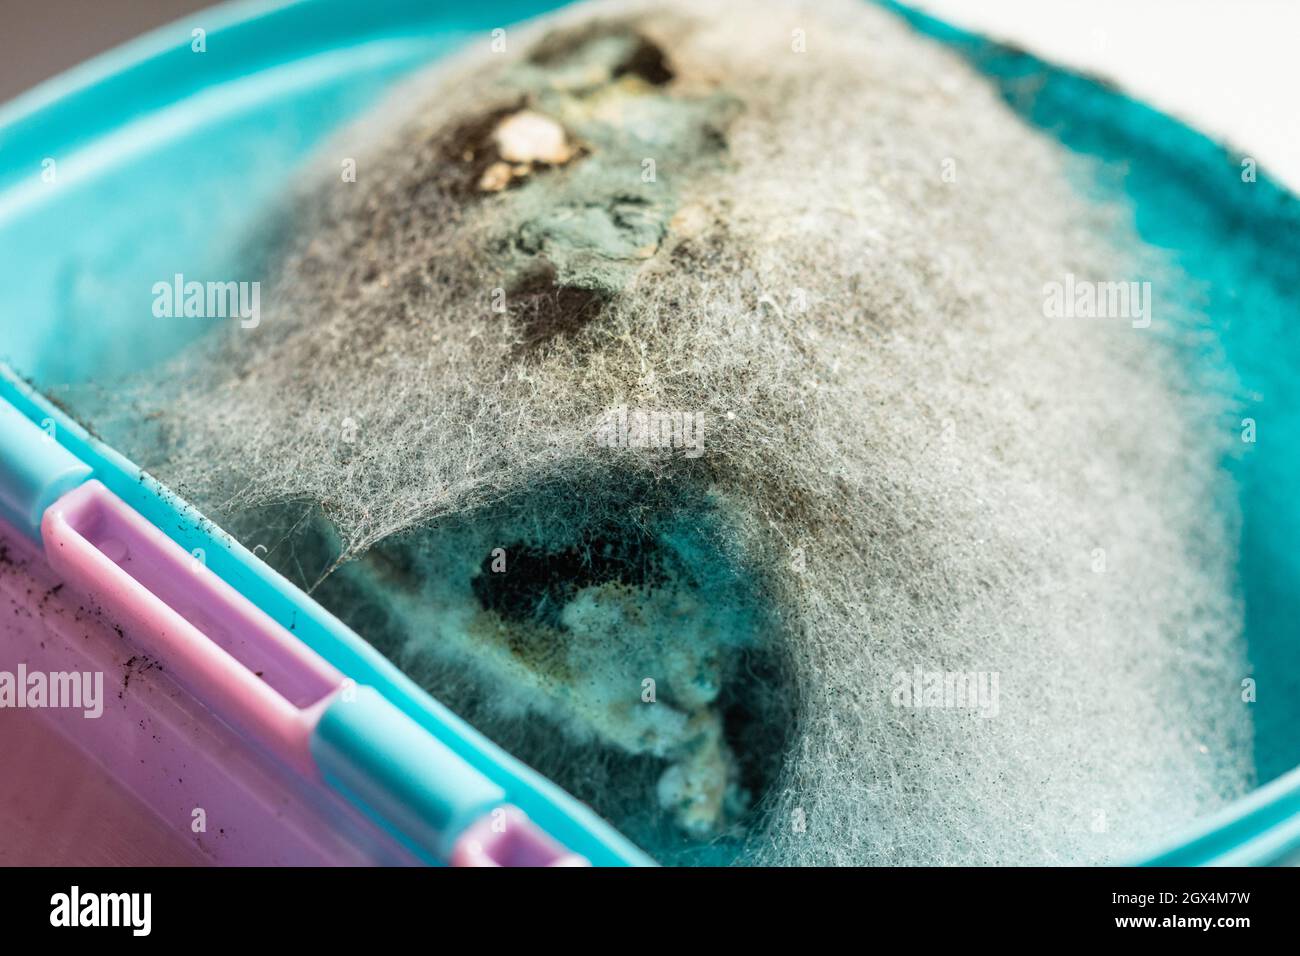 Rotten and moldy food close up in lanchbox. Stock Photo